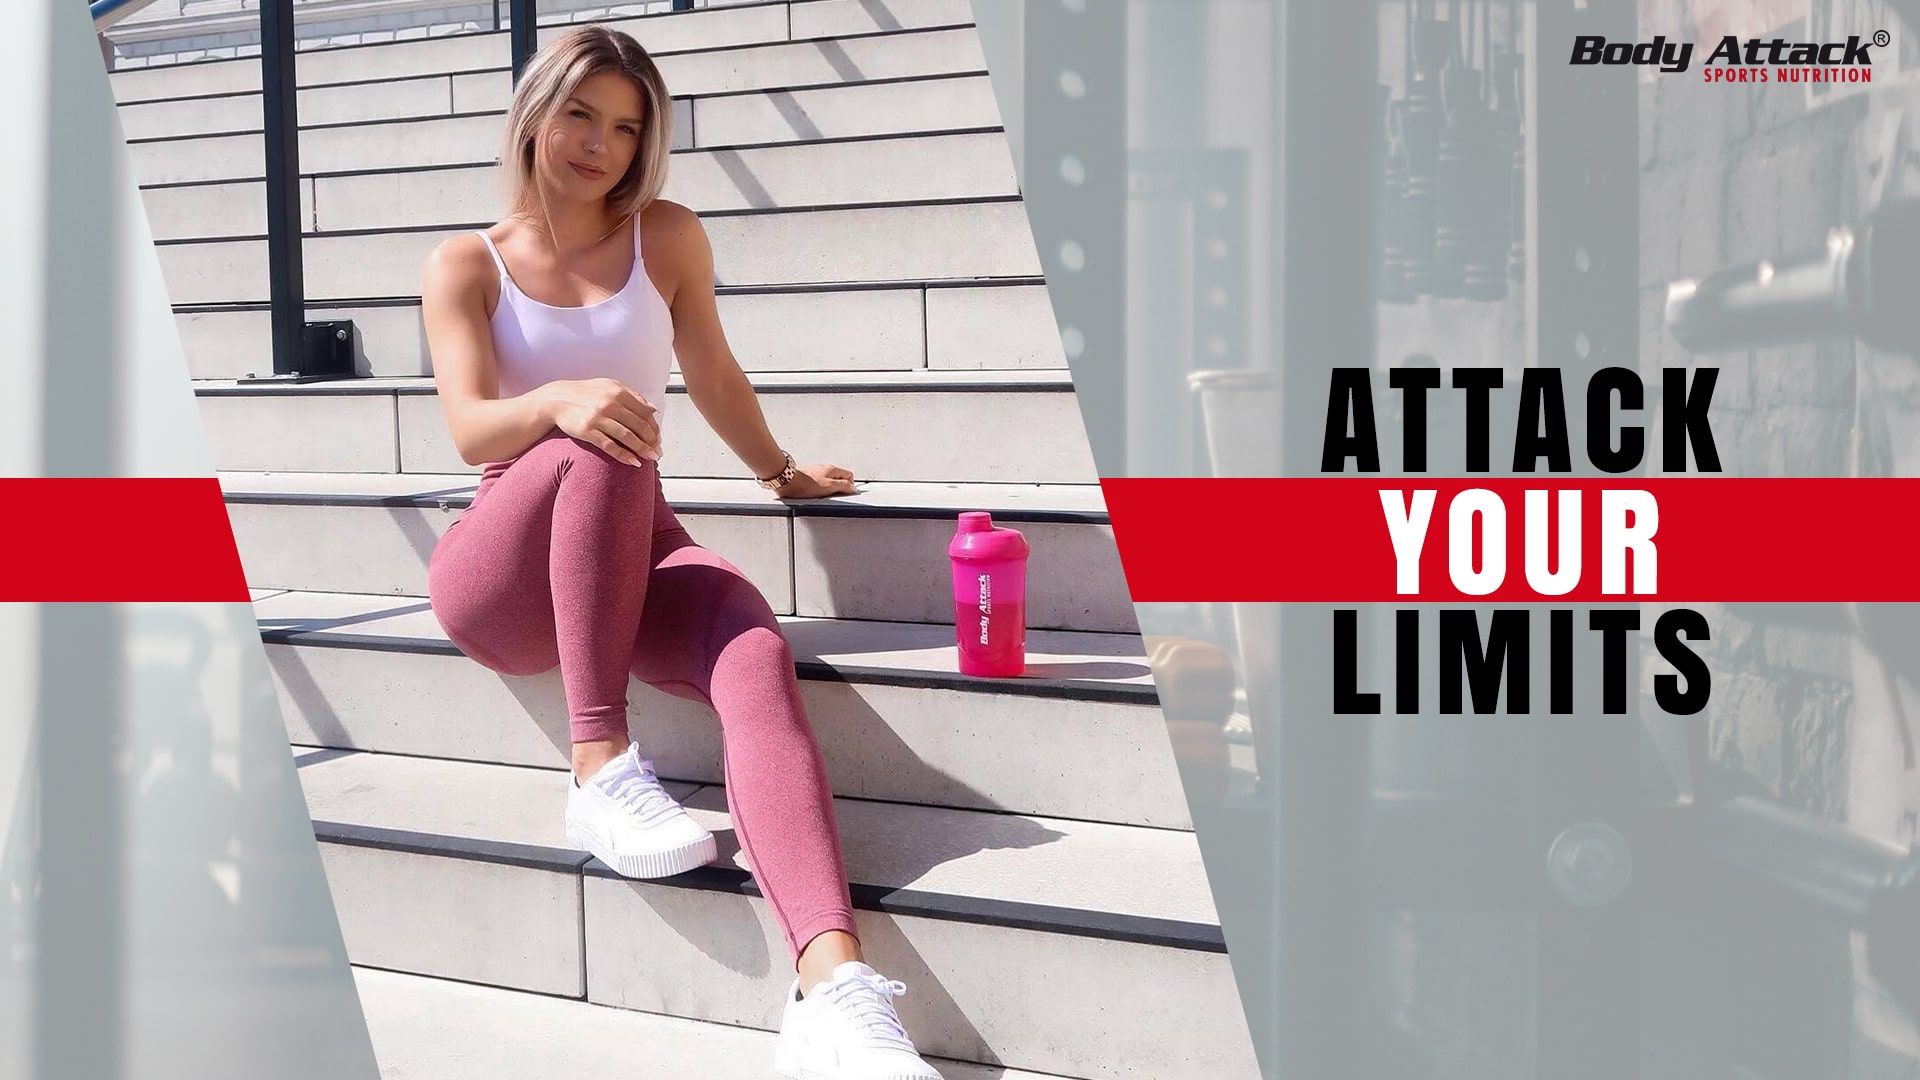 Body Attack - Attack Your Limits